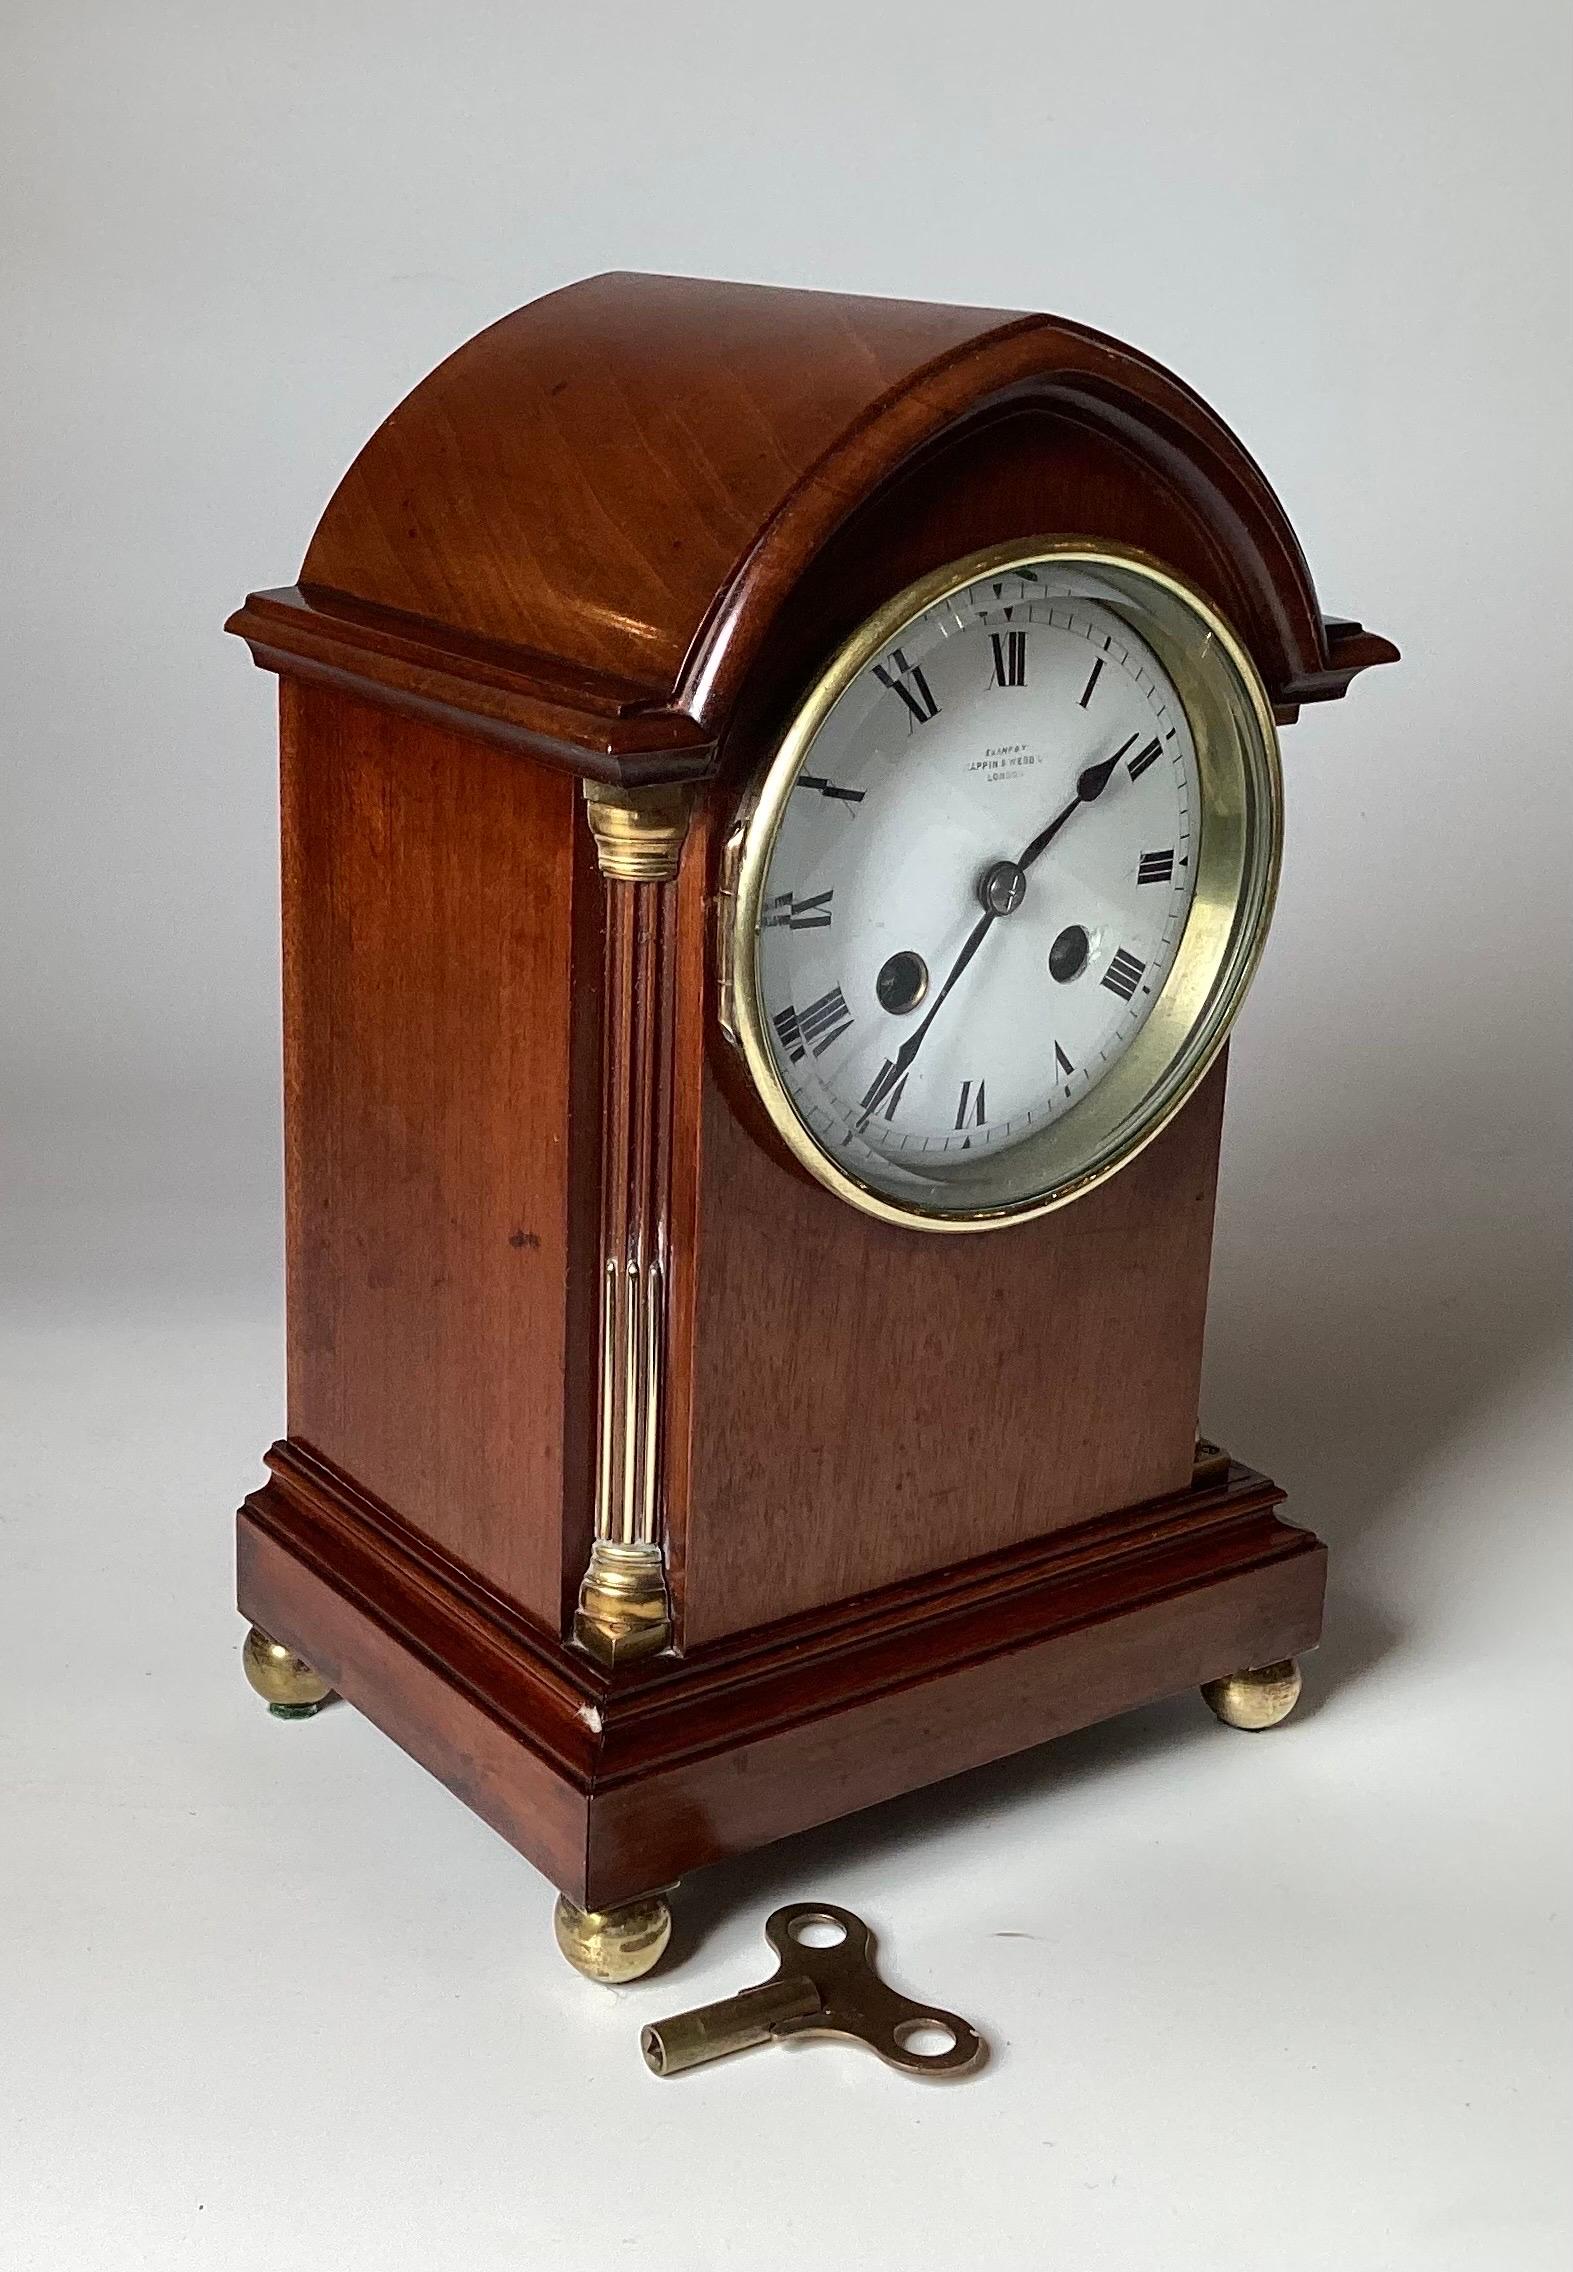 Late 19th Century A Diminutive French Mahogany Mantel Clock, Retailed by Mappin & Webb, 19th Cent.